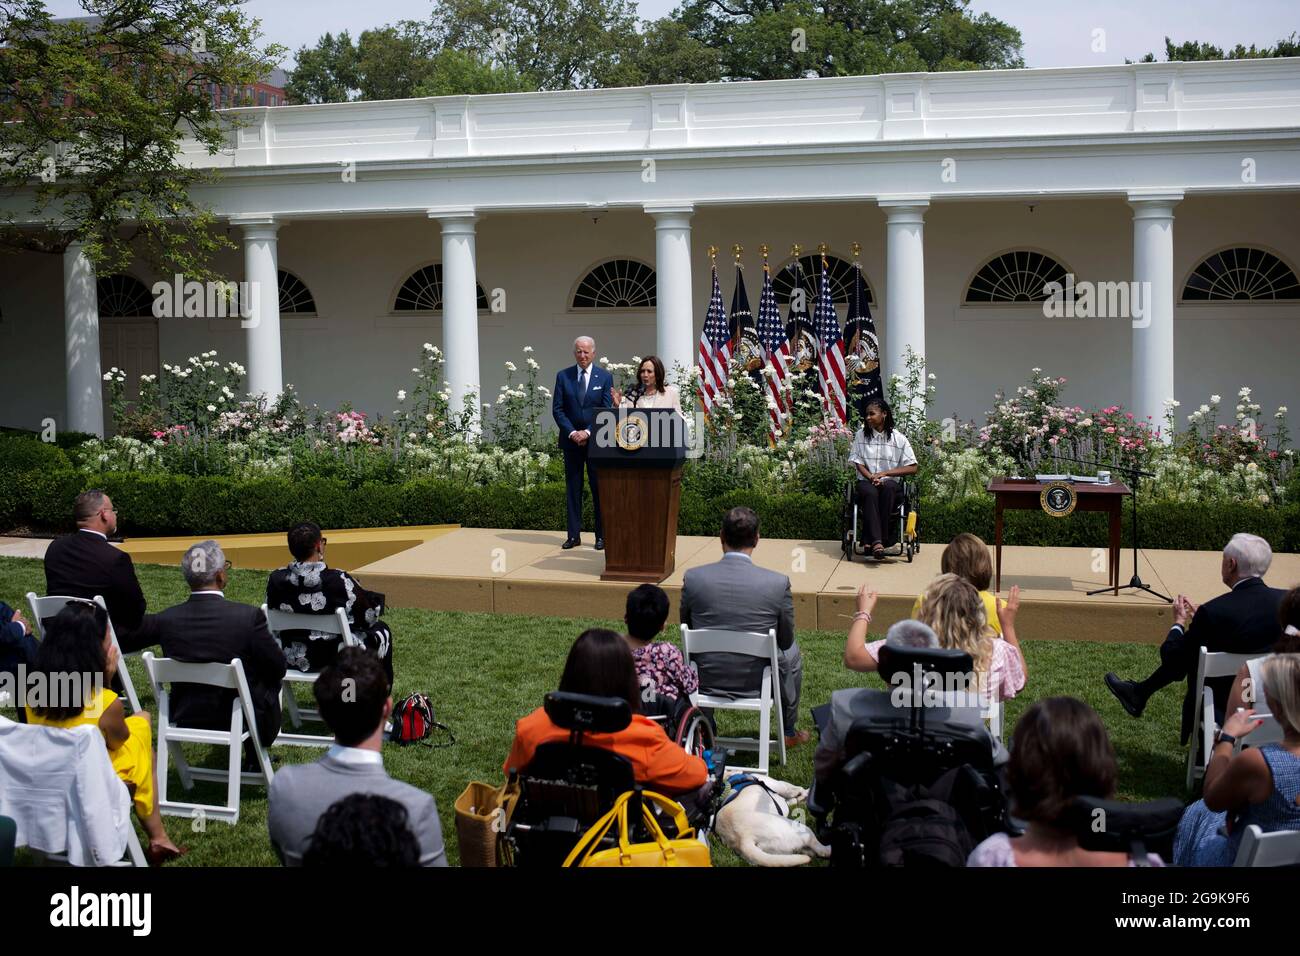 Washington, USA. 26th July, 2021. U.S. President Joe Biden (1st L, Rear) and Vice President Kamala Harris (2nd L, Rear) attend a ceremony celebrating the 31st anniversary of the Americans with Disabilities Act (ADA) at the White House in Washington, DC, the United States, on July 26, 2021. Credit: Ting Shen/Xinhua/Alamy Live News Stock Photo